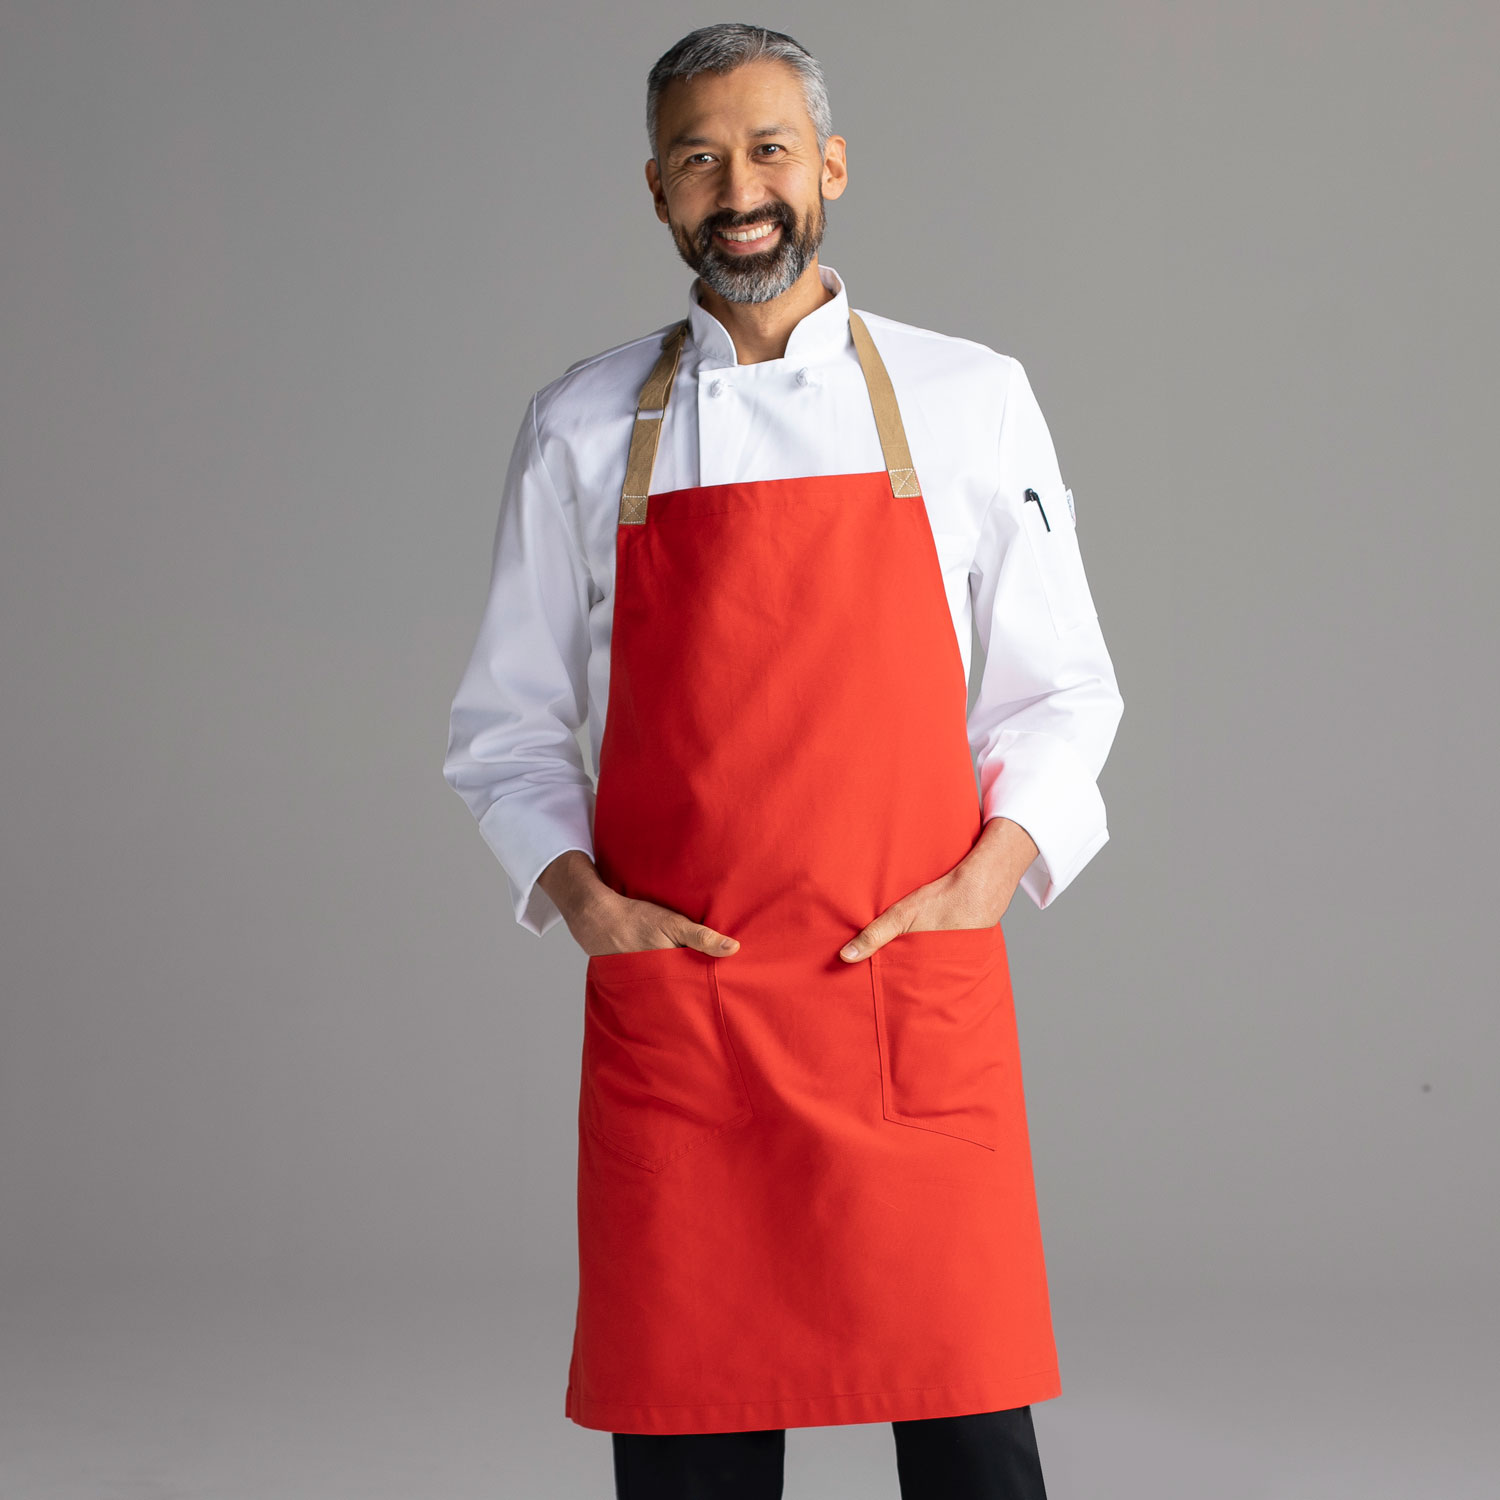 Chefwear Red Bib Apron for Chefs and Cooks, Chef Wear Style CW1692